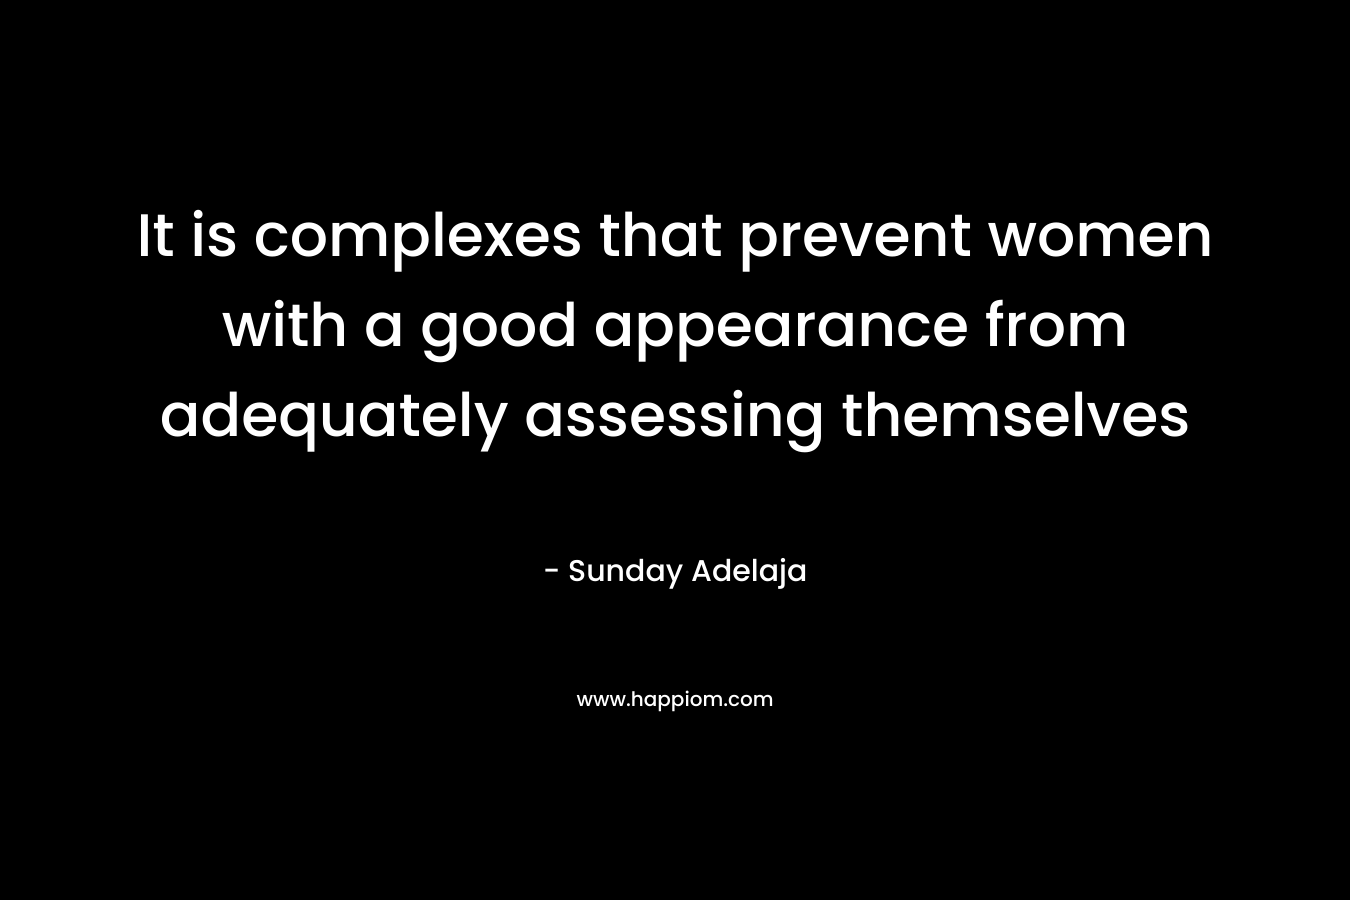 It is complexes that prevent women with a good appearance from adequately assessing themselves – Sunday Adelaja